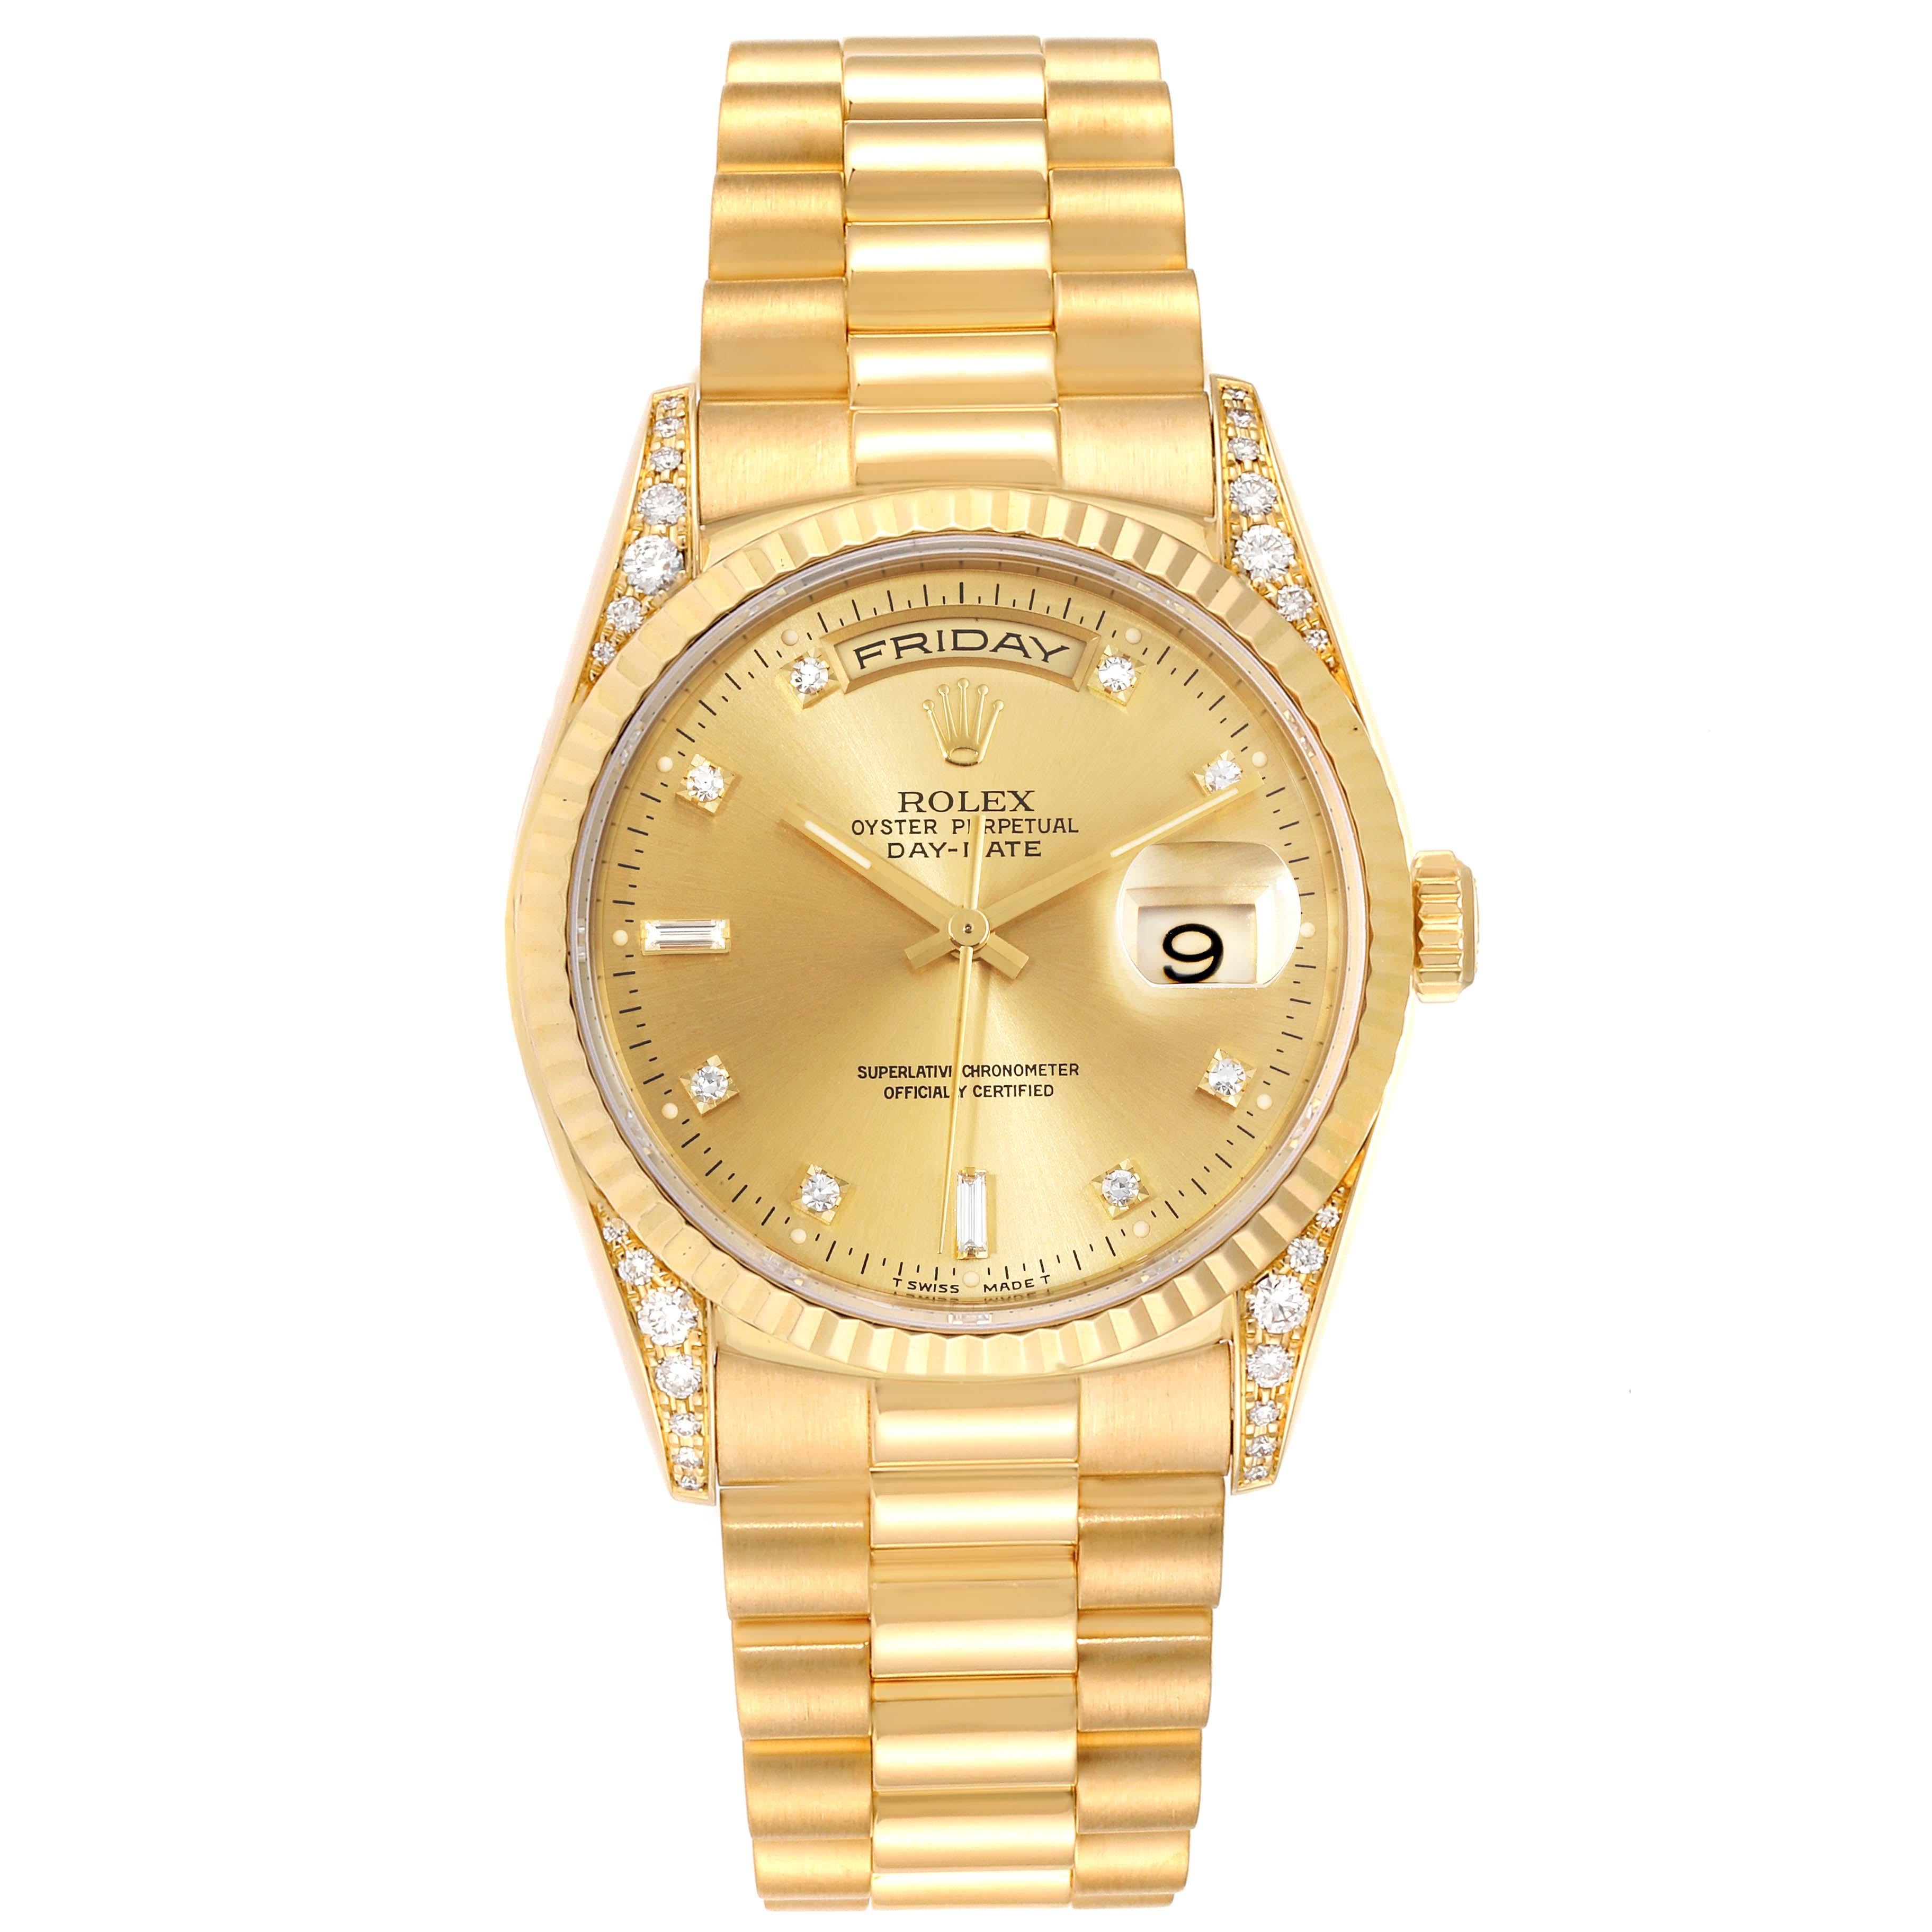 Rolex President Day Date Yellow Gold Diamond Lugs Watch 118338 Box Papers. Officially certified chronometer self-winding movement. 18k yellow gold oyster case 36.0 mm in diameter. Rolex logo on a crown. Original Rolex factory diamond lugs. 18K